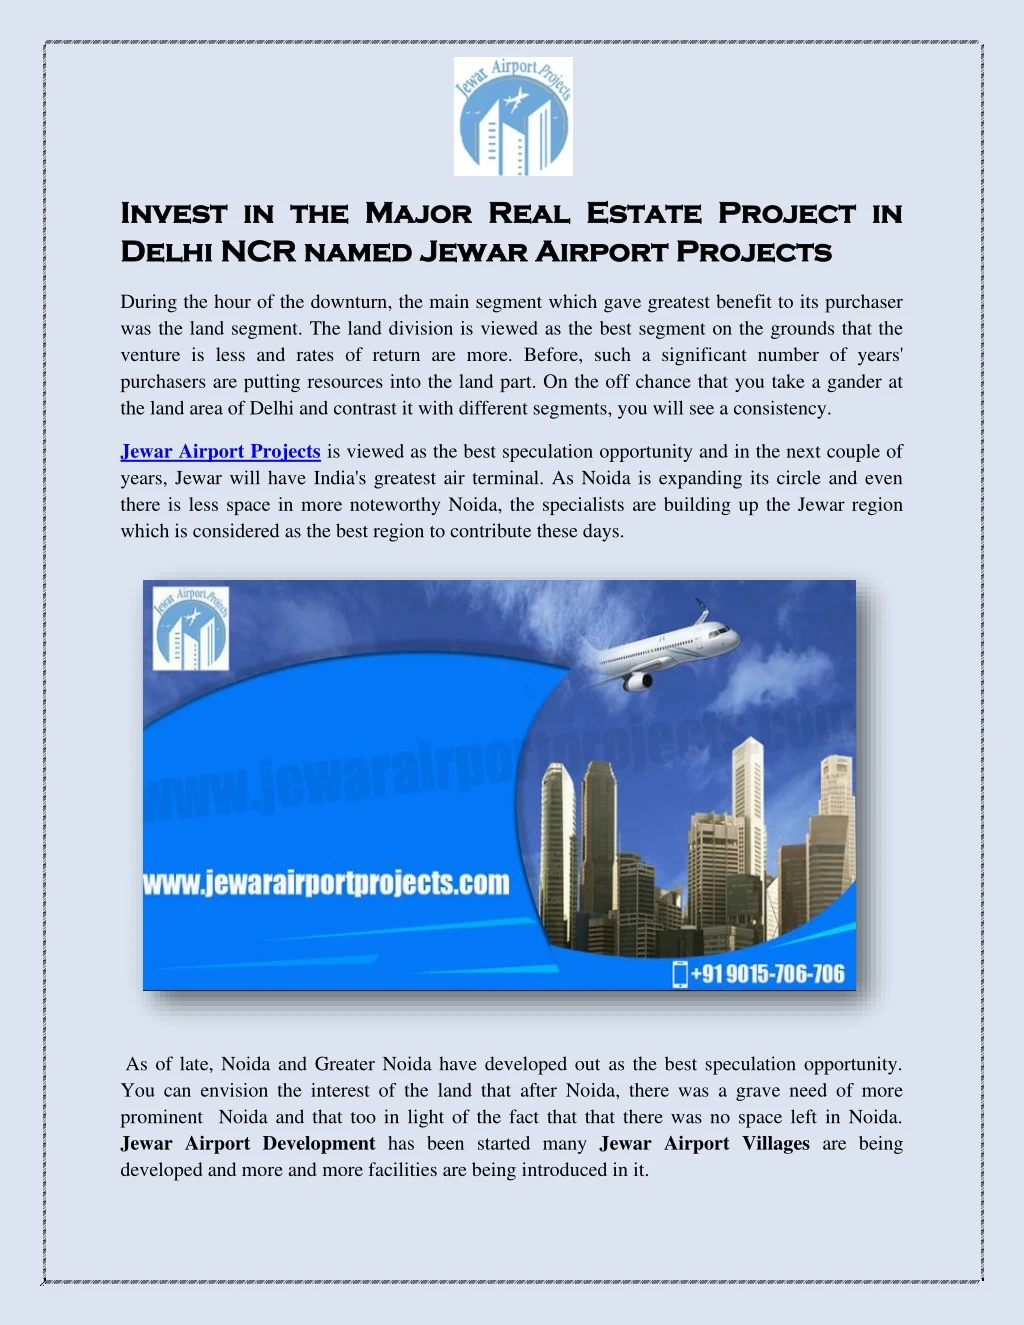 invest in the major real estate project in invest